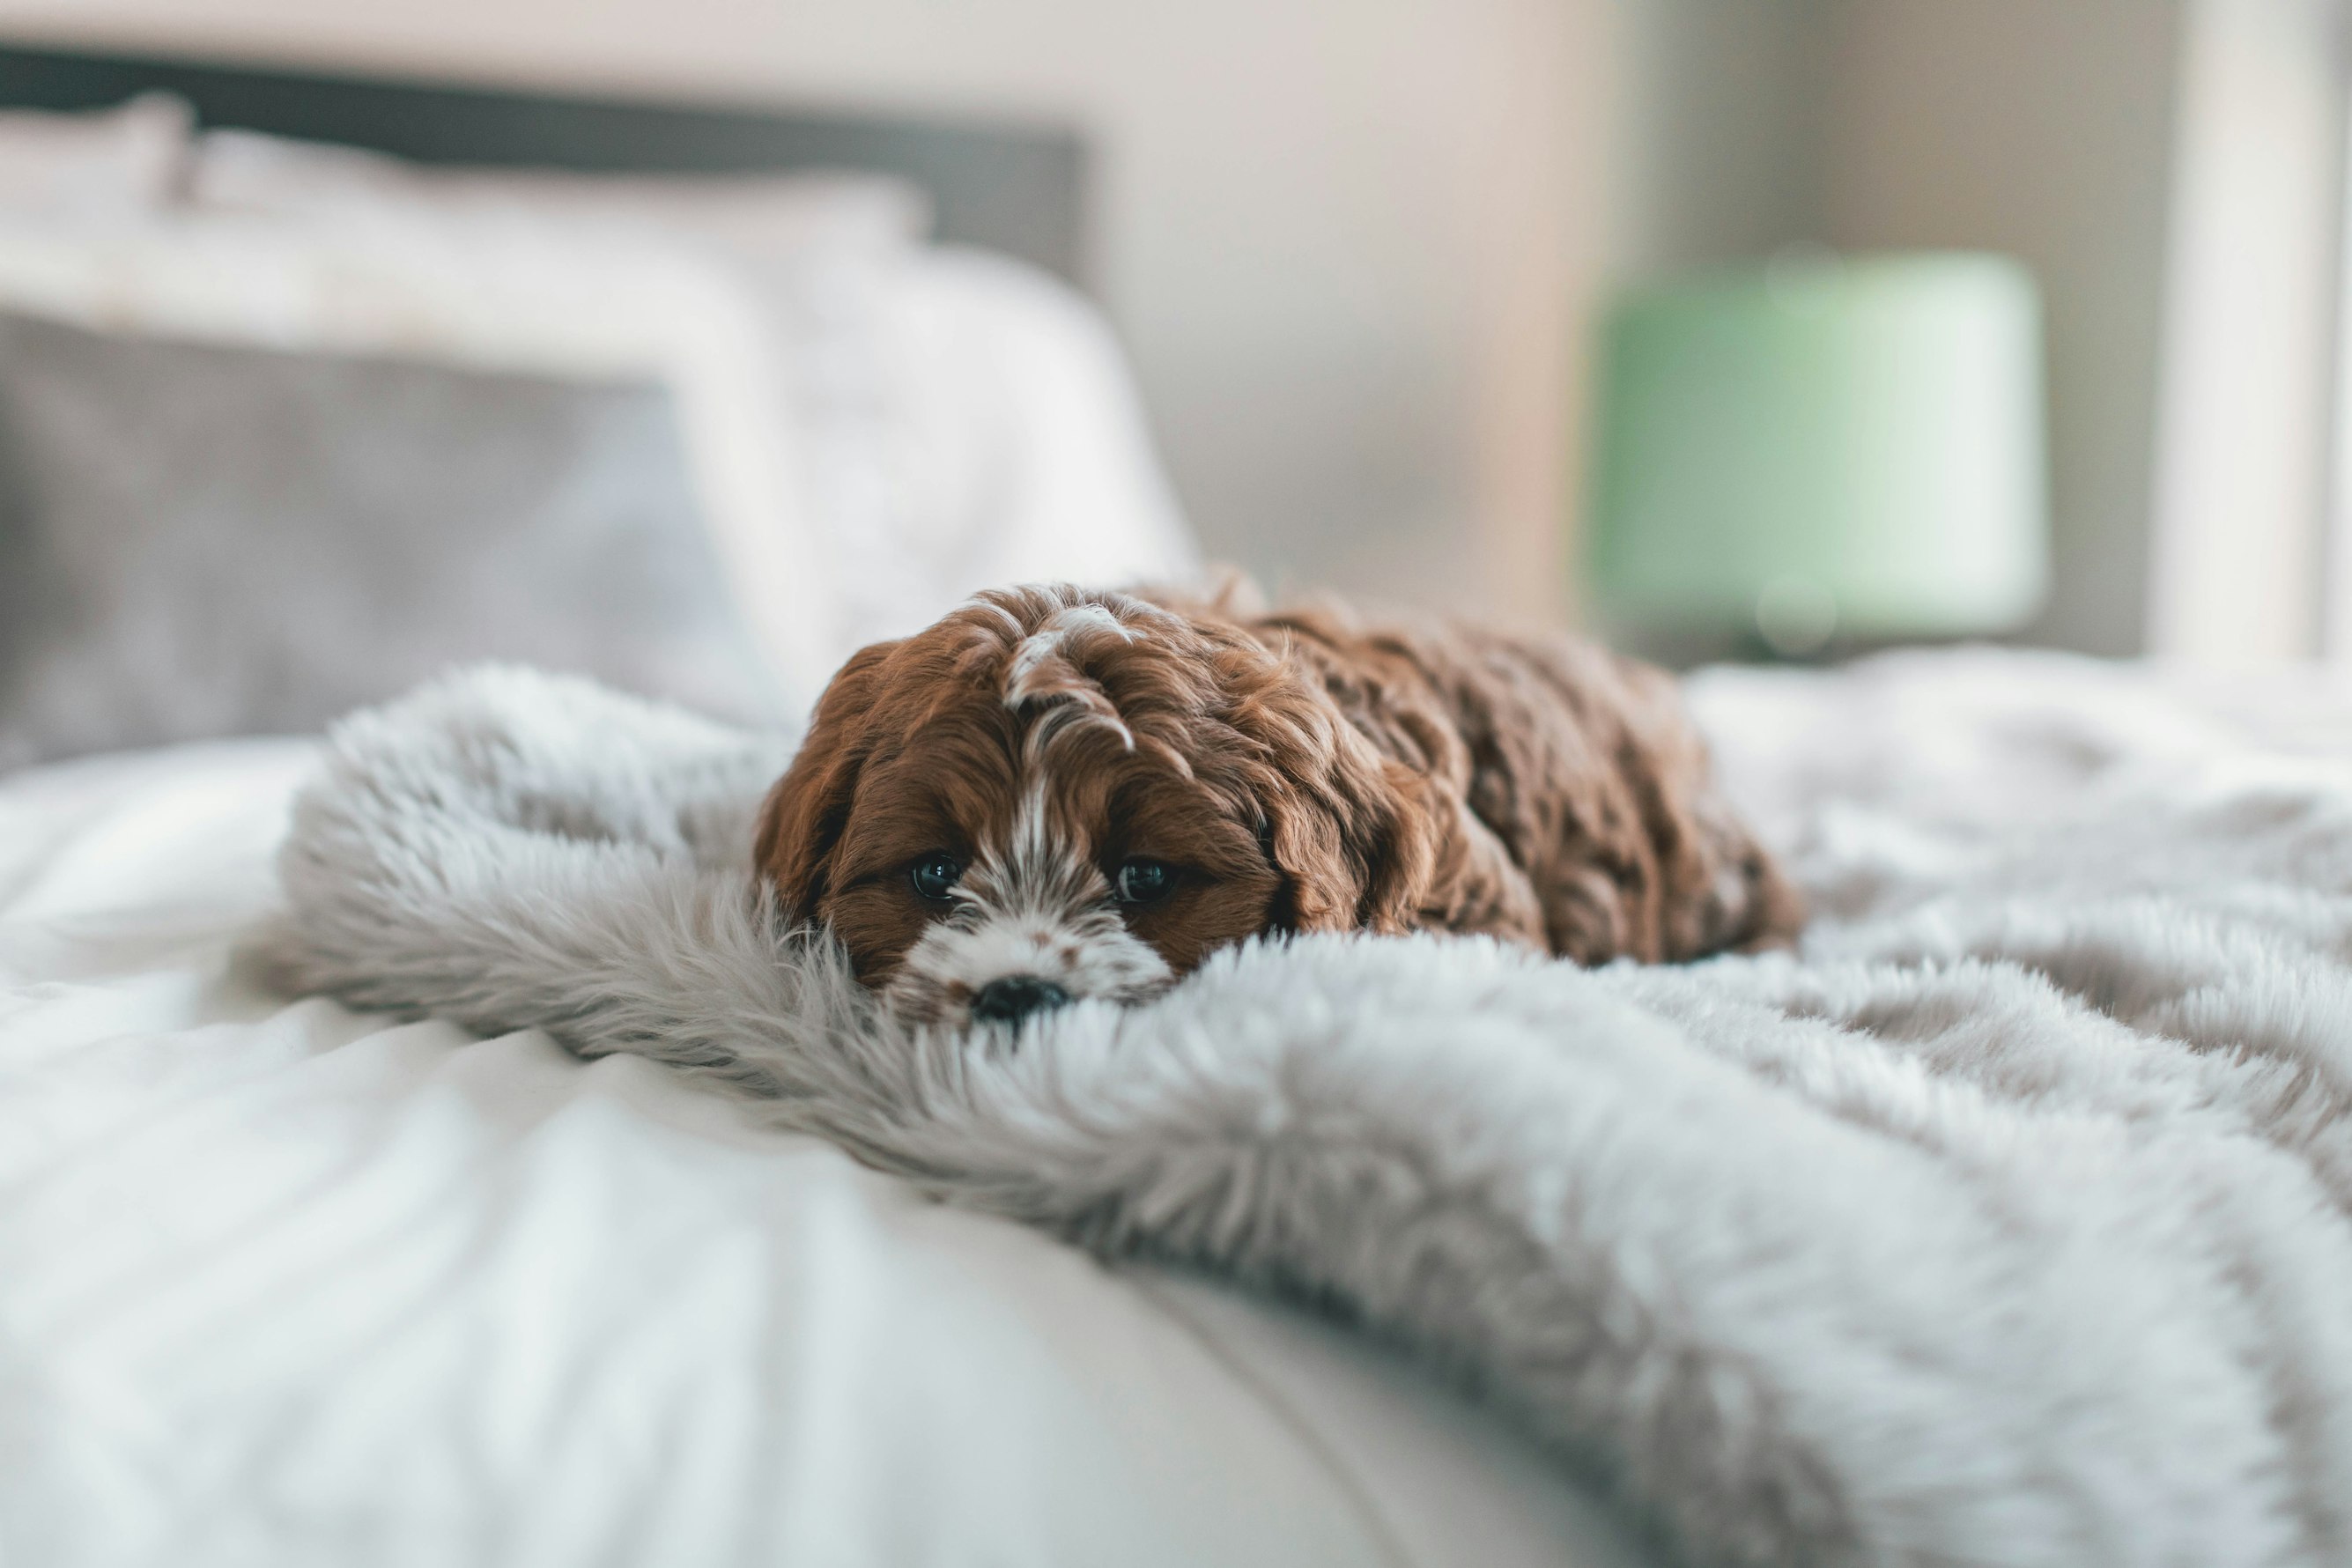 Fluffy puppy laying on soft bedding on bed - Photo by Roberto Nickson on Unsplash